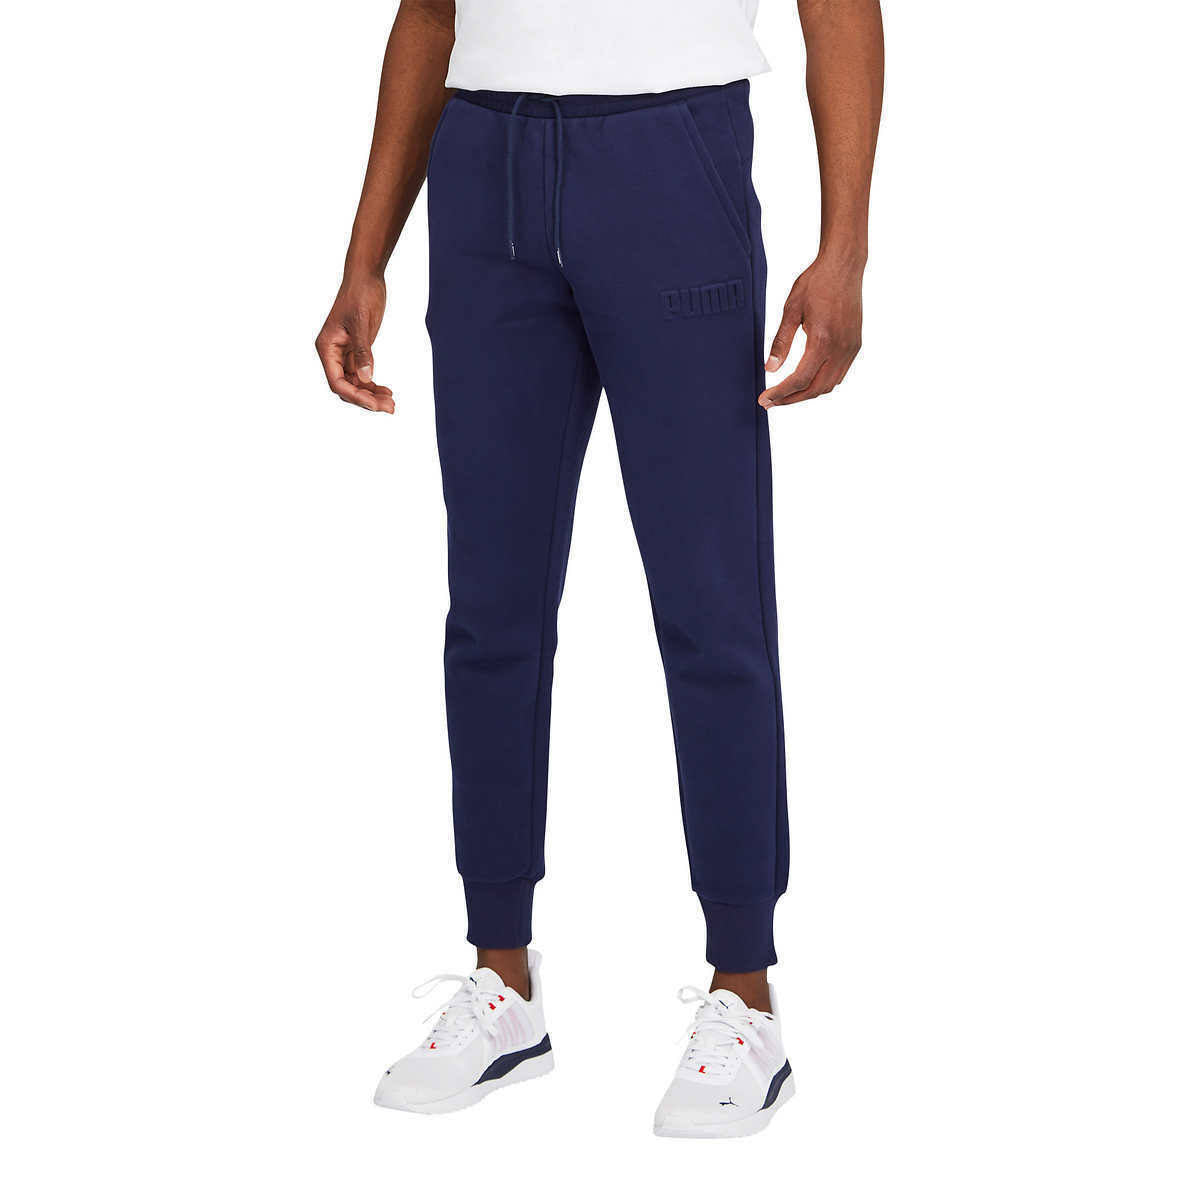 Original Puma sports pants for men, in several colors from Puma